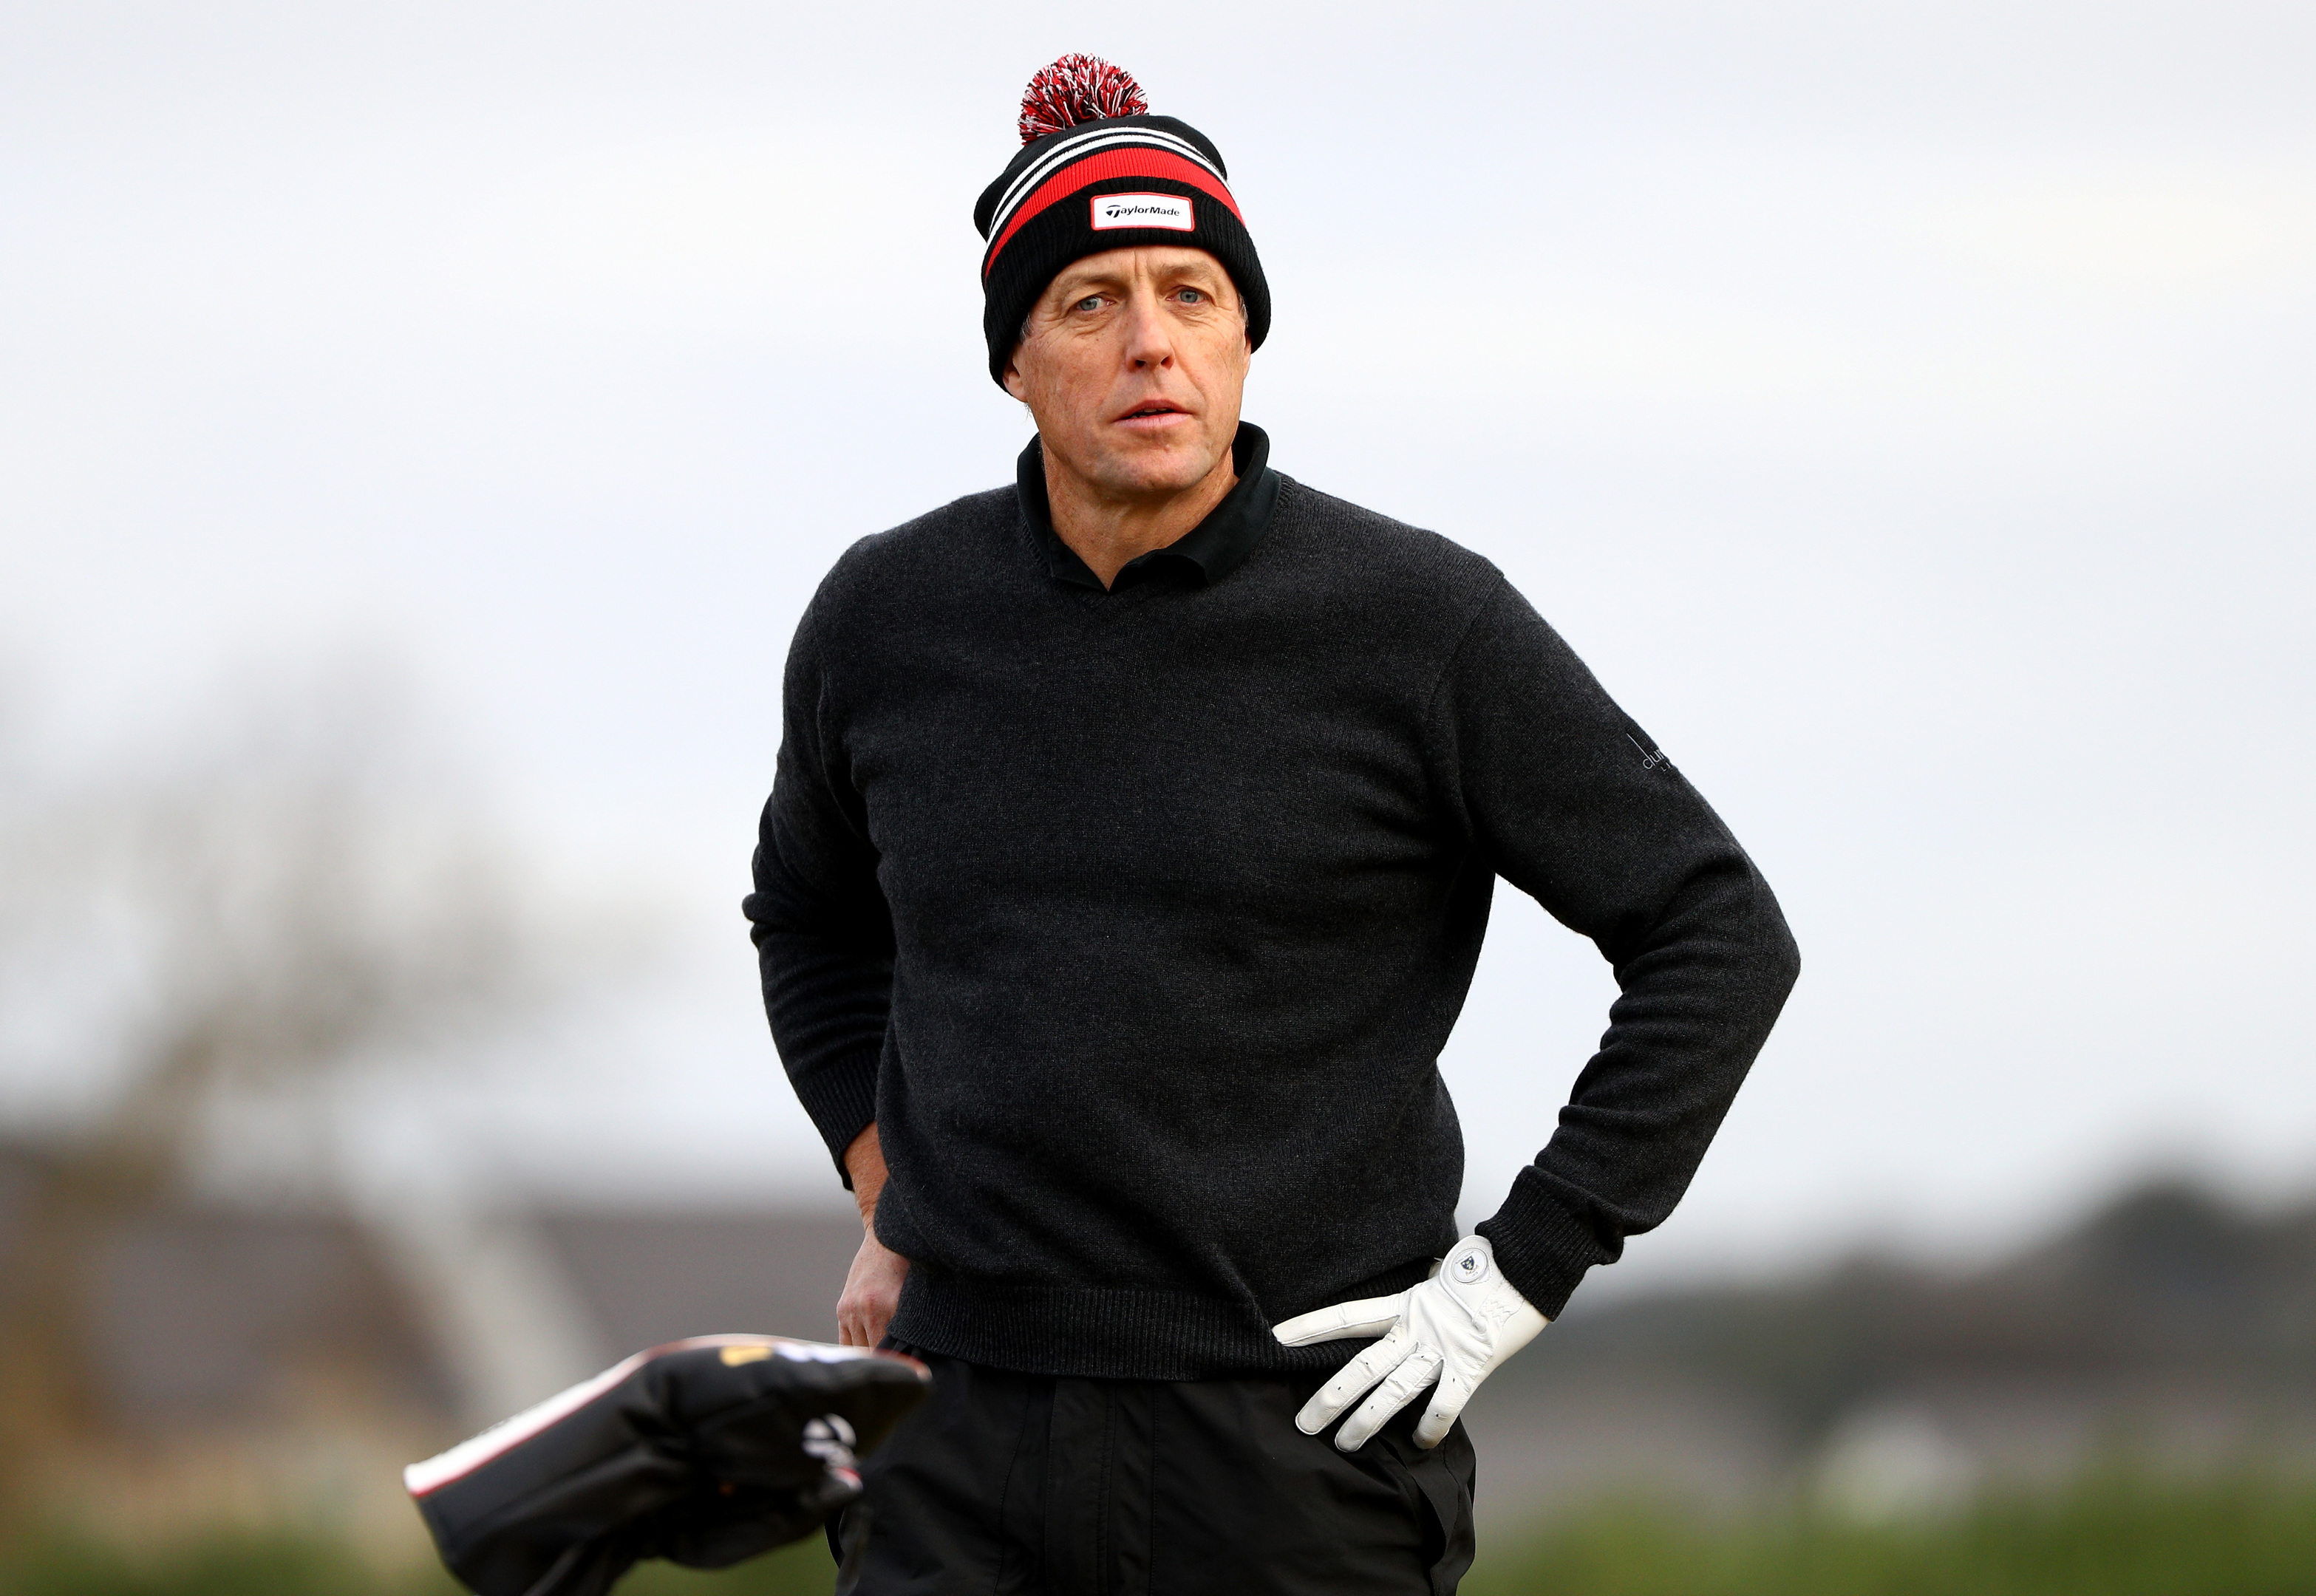 Actor Hugh Grant during the first round of the Alfred Dunhill Links Championship on the Championship Course, Carnoustie